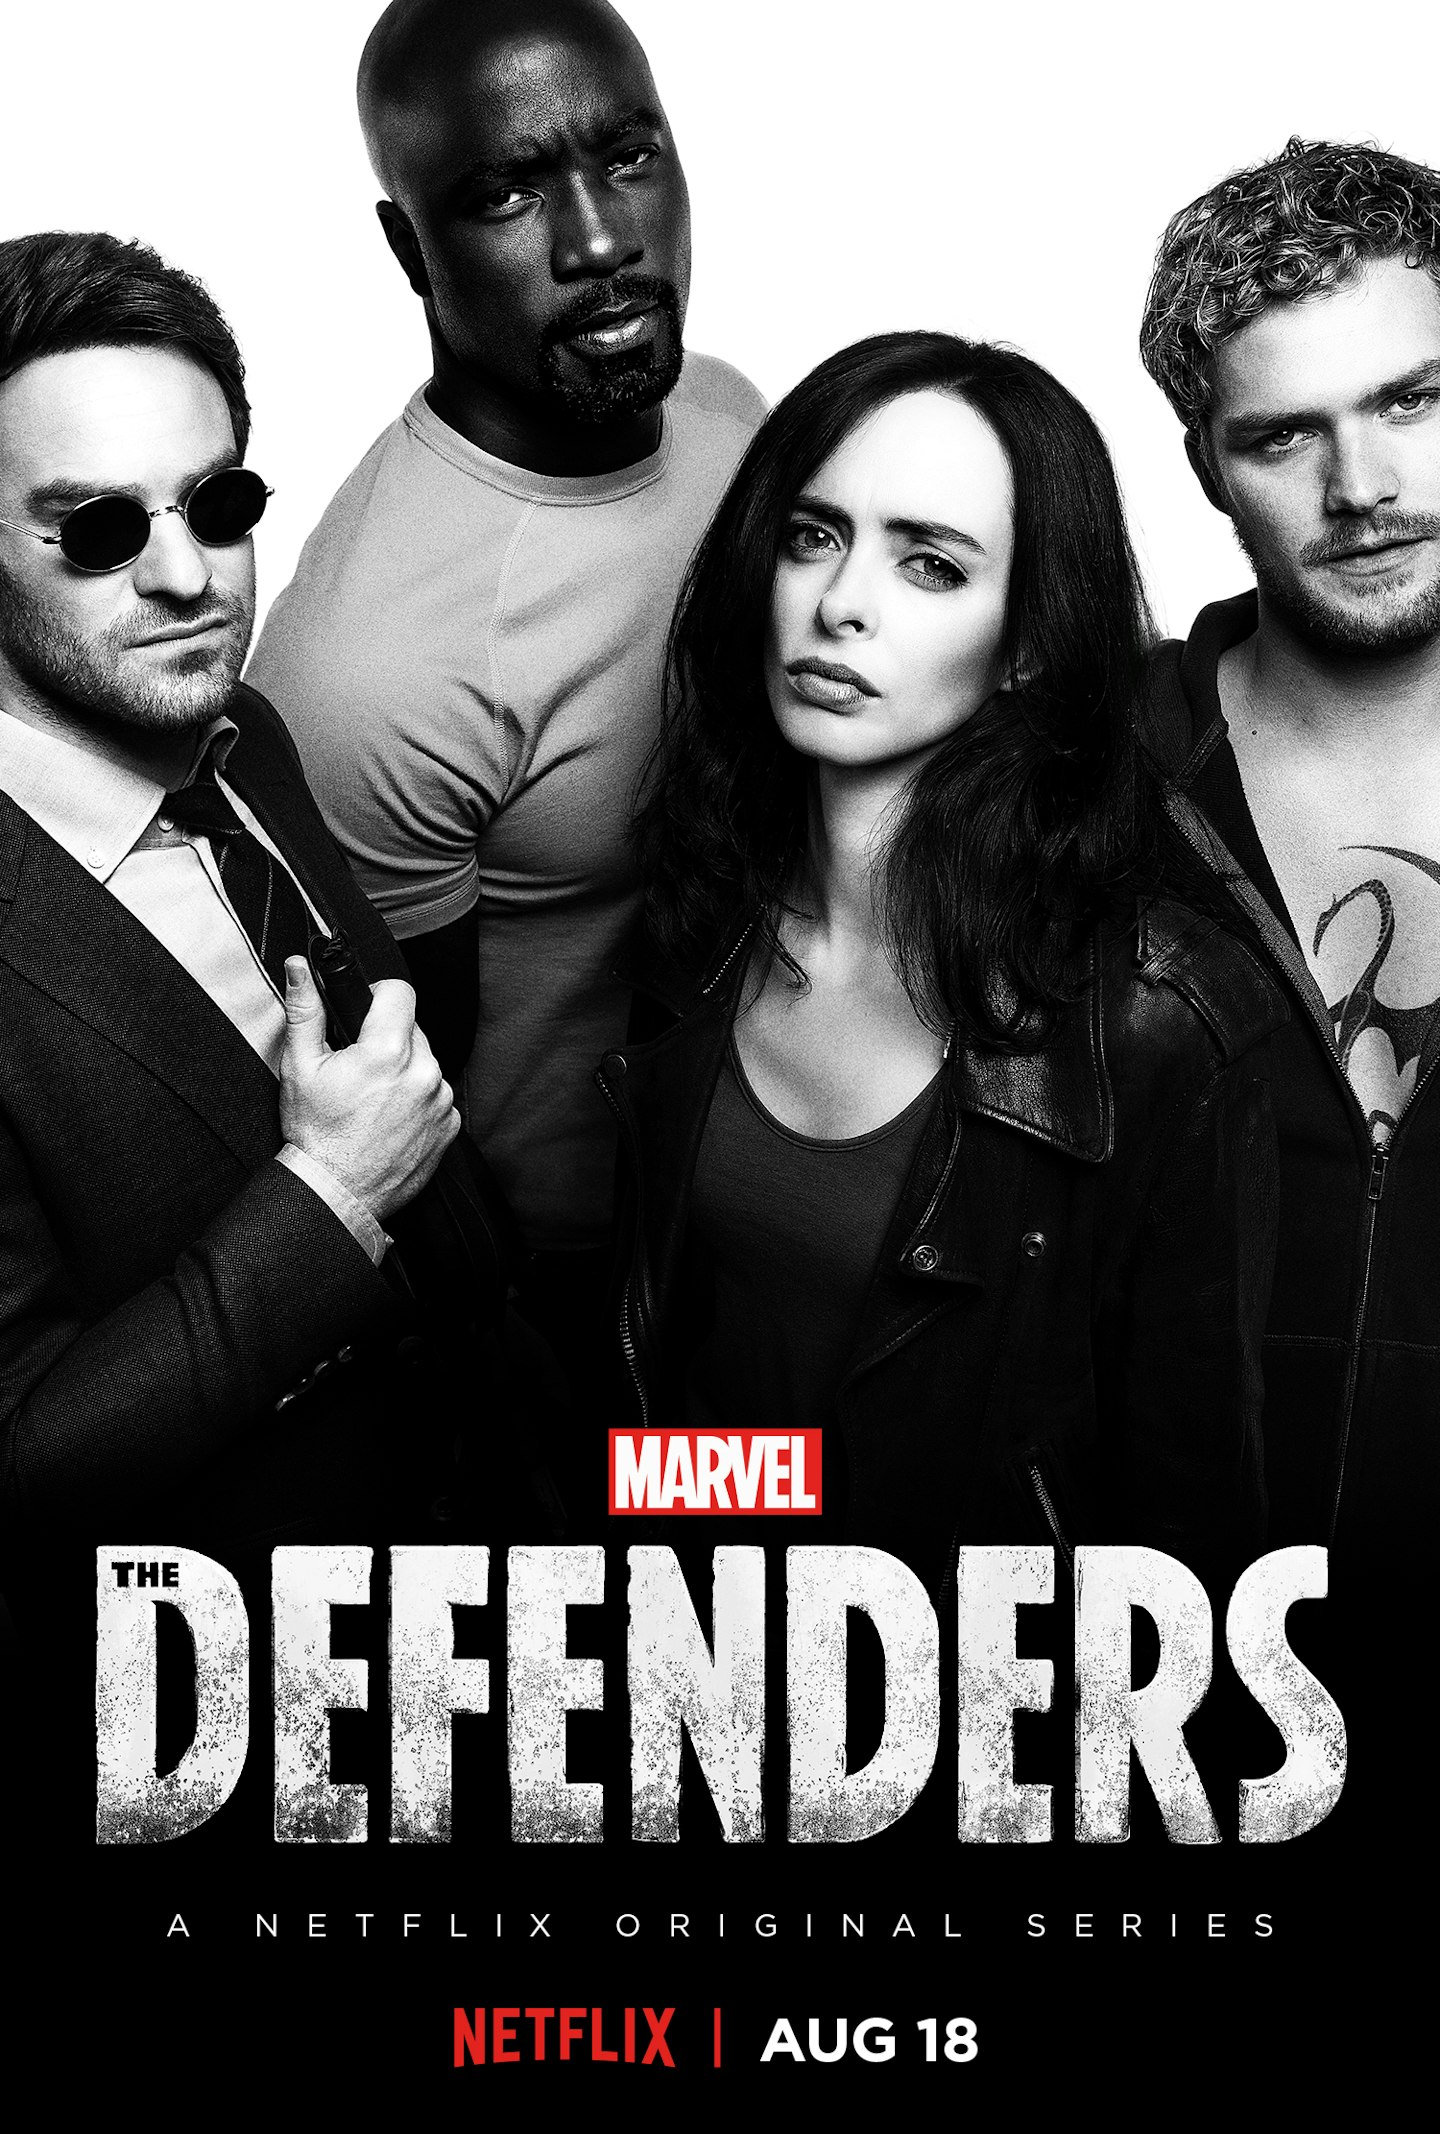 The Defenders new poster